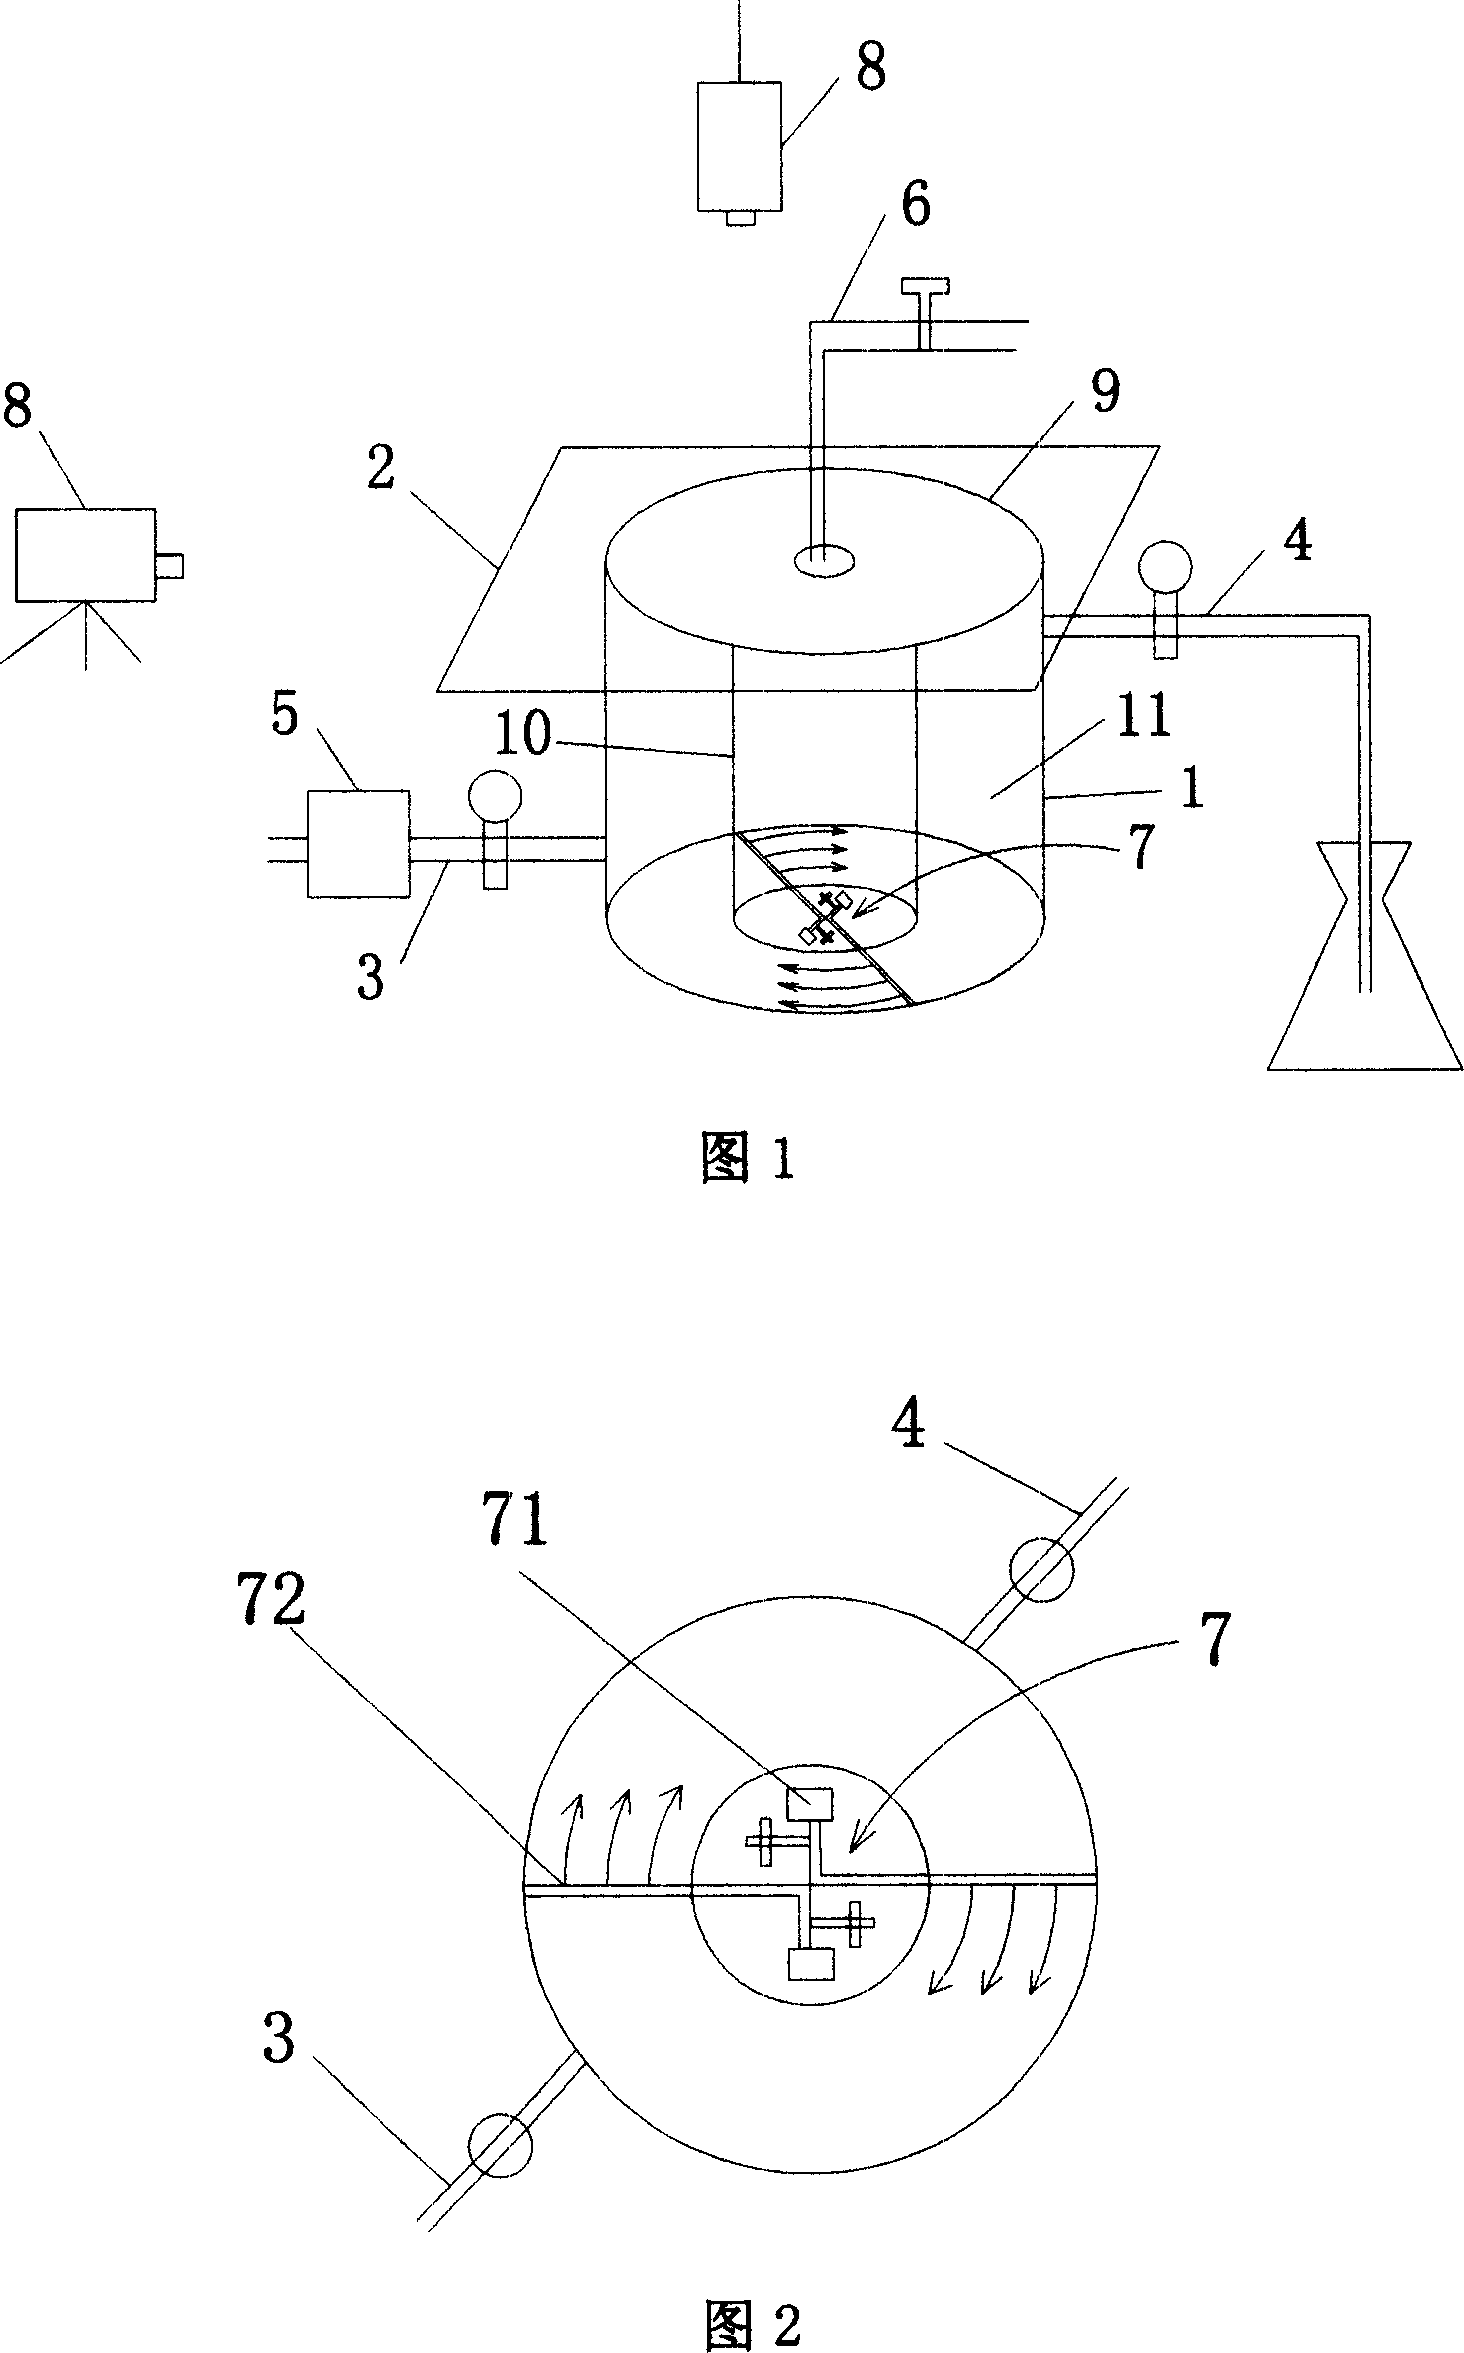 Synchronous recording and detecting apparatus for fish movement metabolism